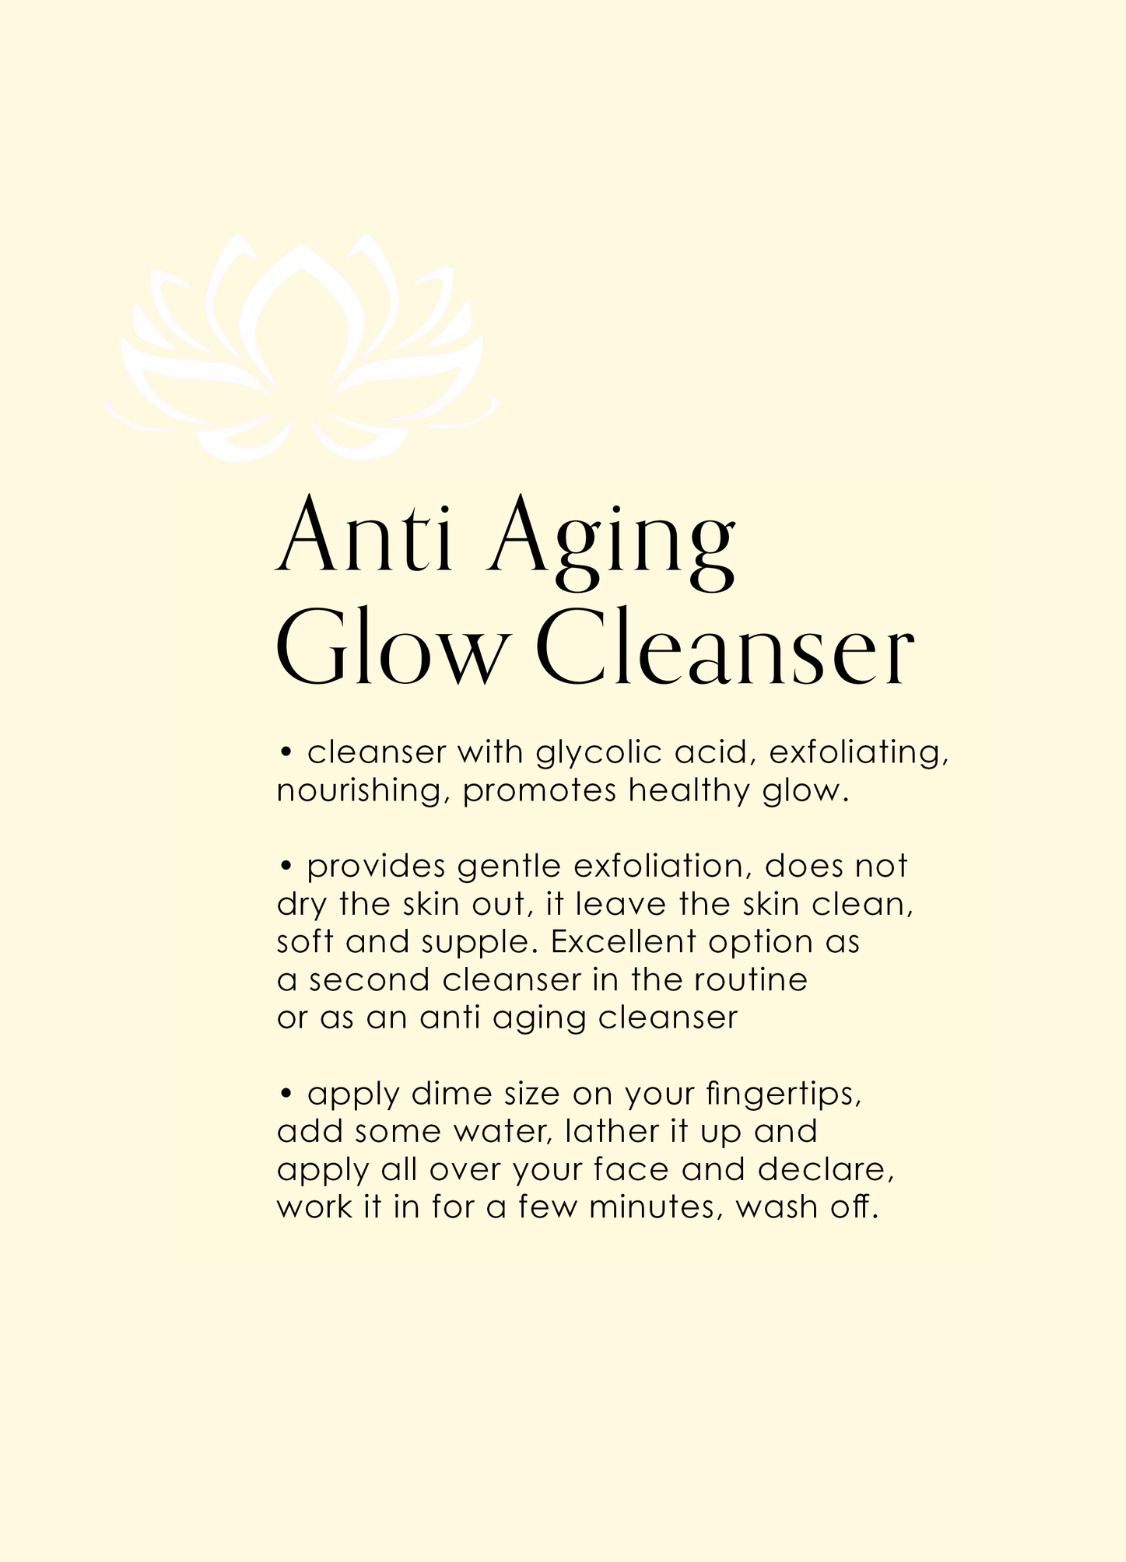 Anti Aging Glow Cleanser